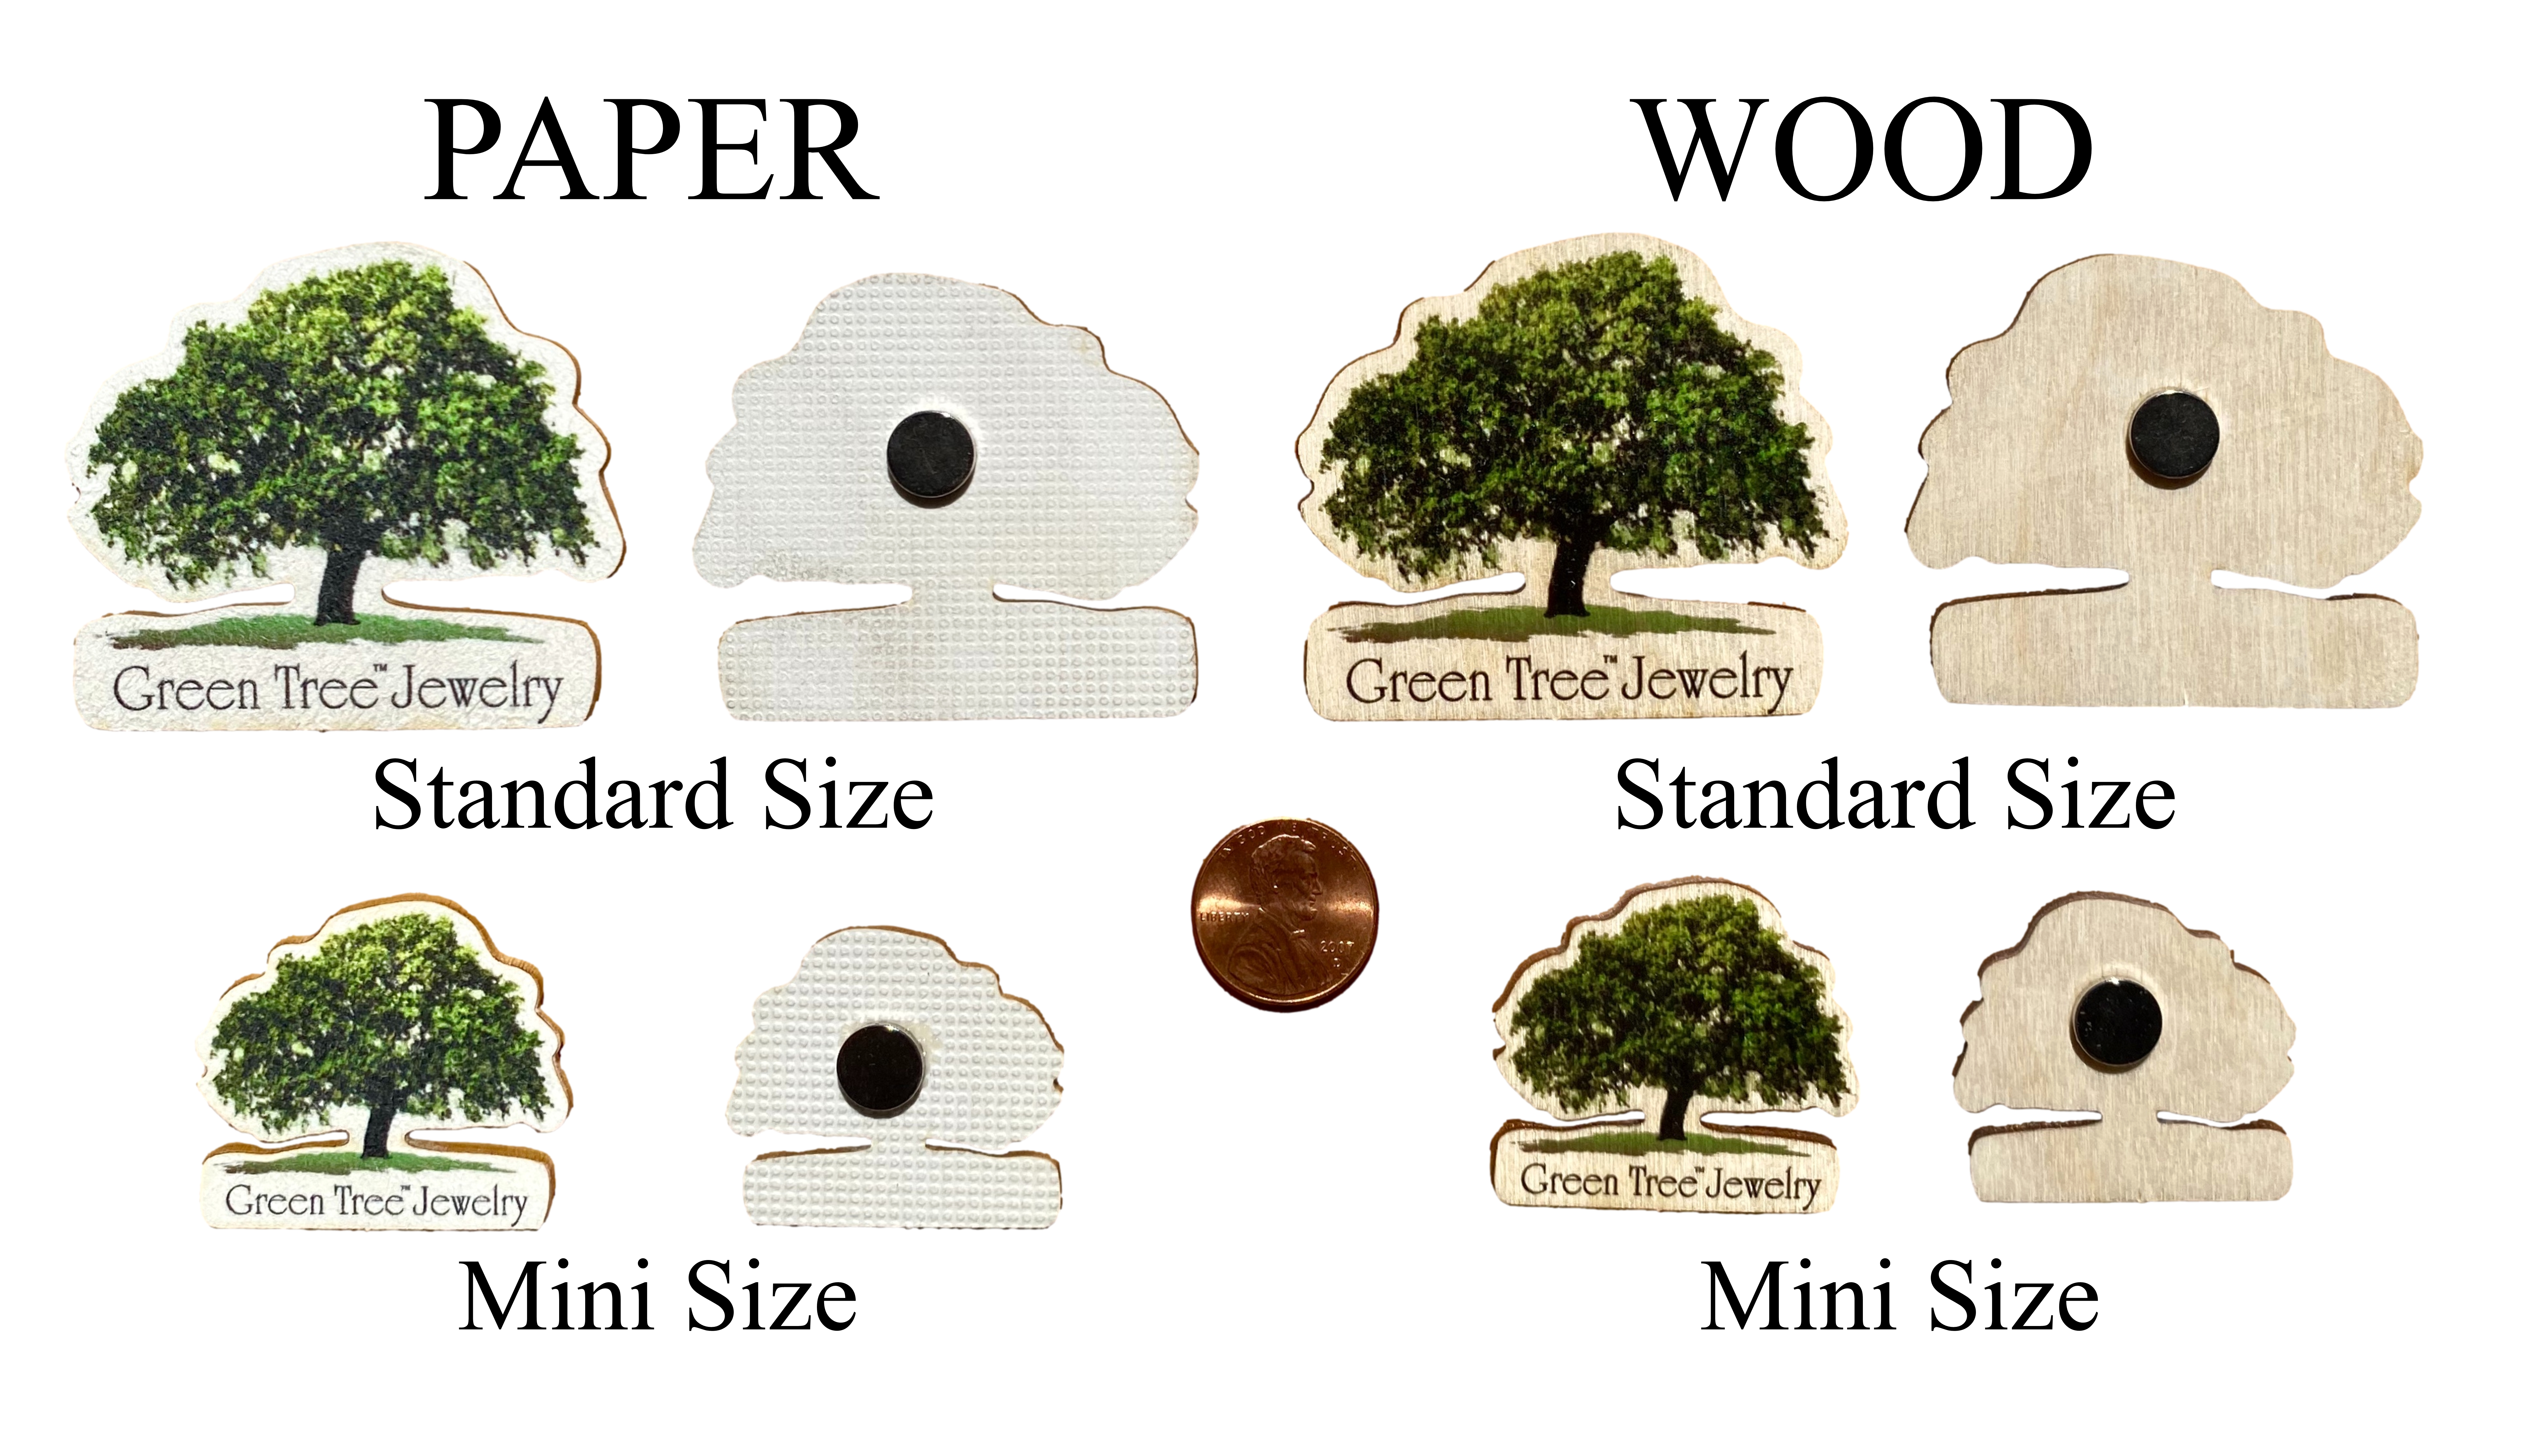 Small Hande Painted Birch Tree Cut Out Magnets